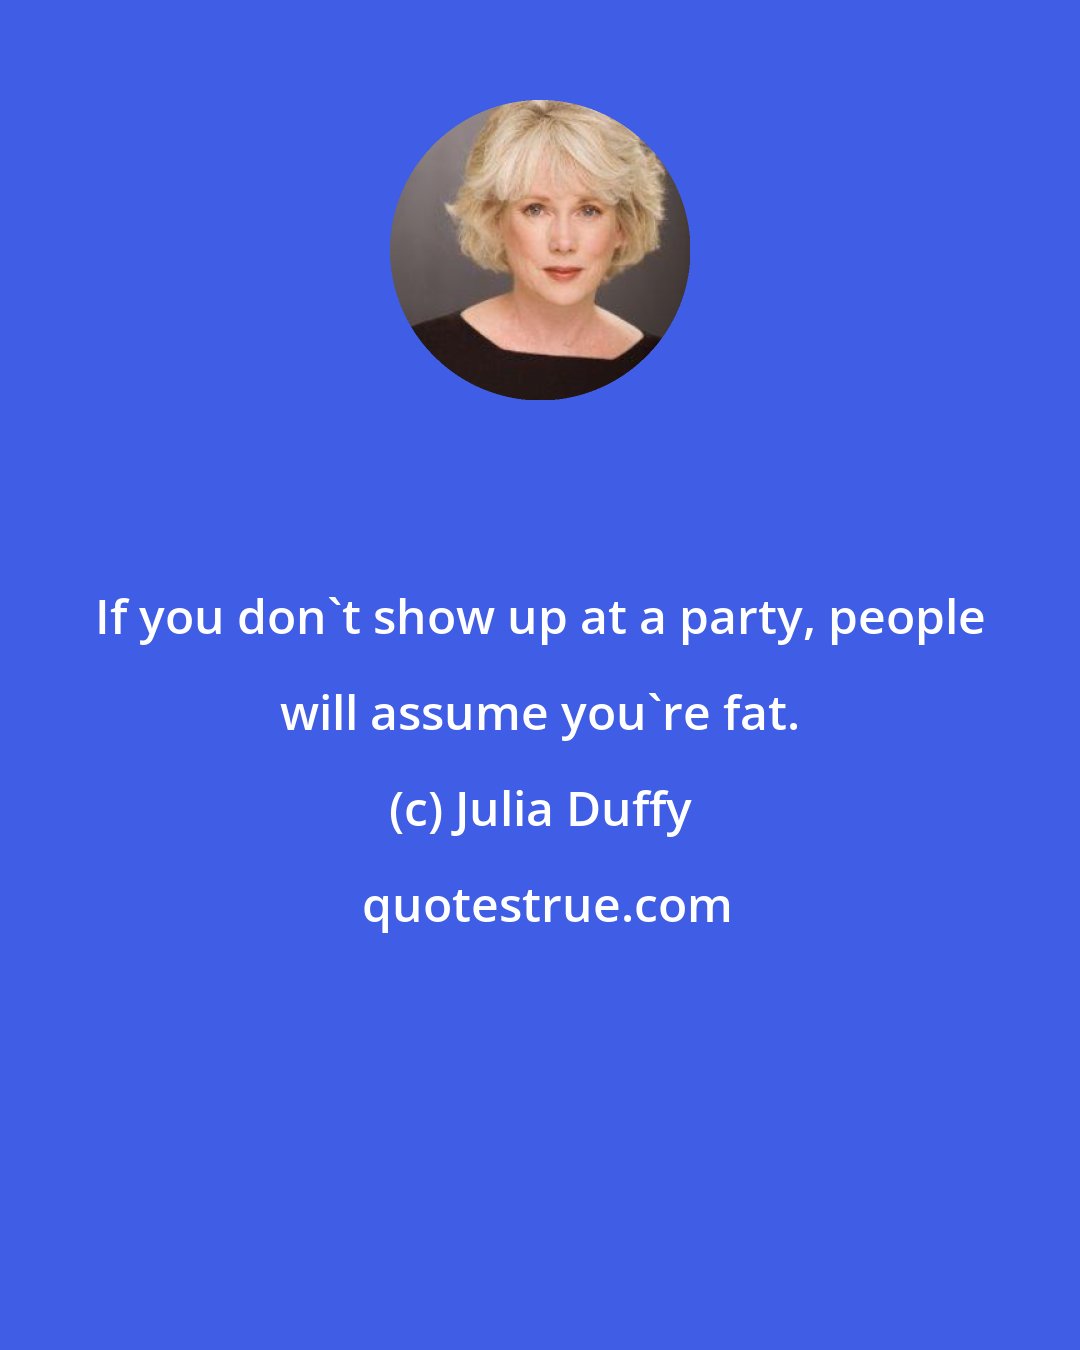 Julia Duffy: If you don't show up at a party, people will assume you're fat.